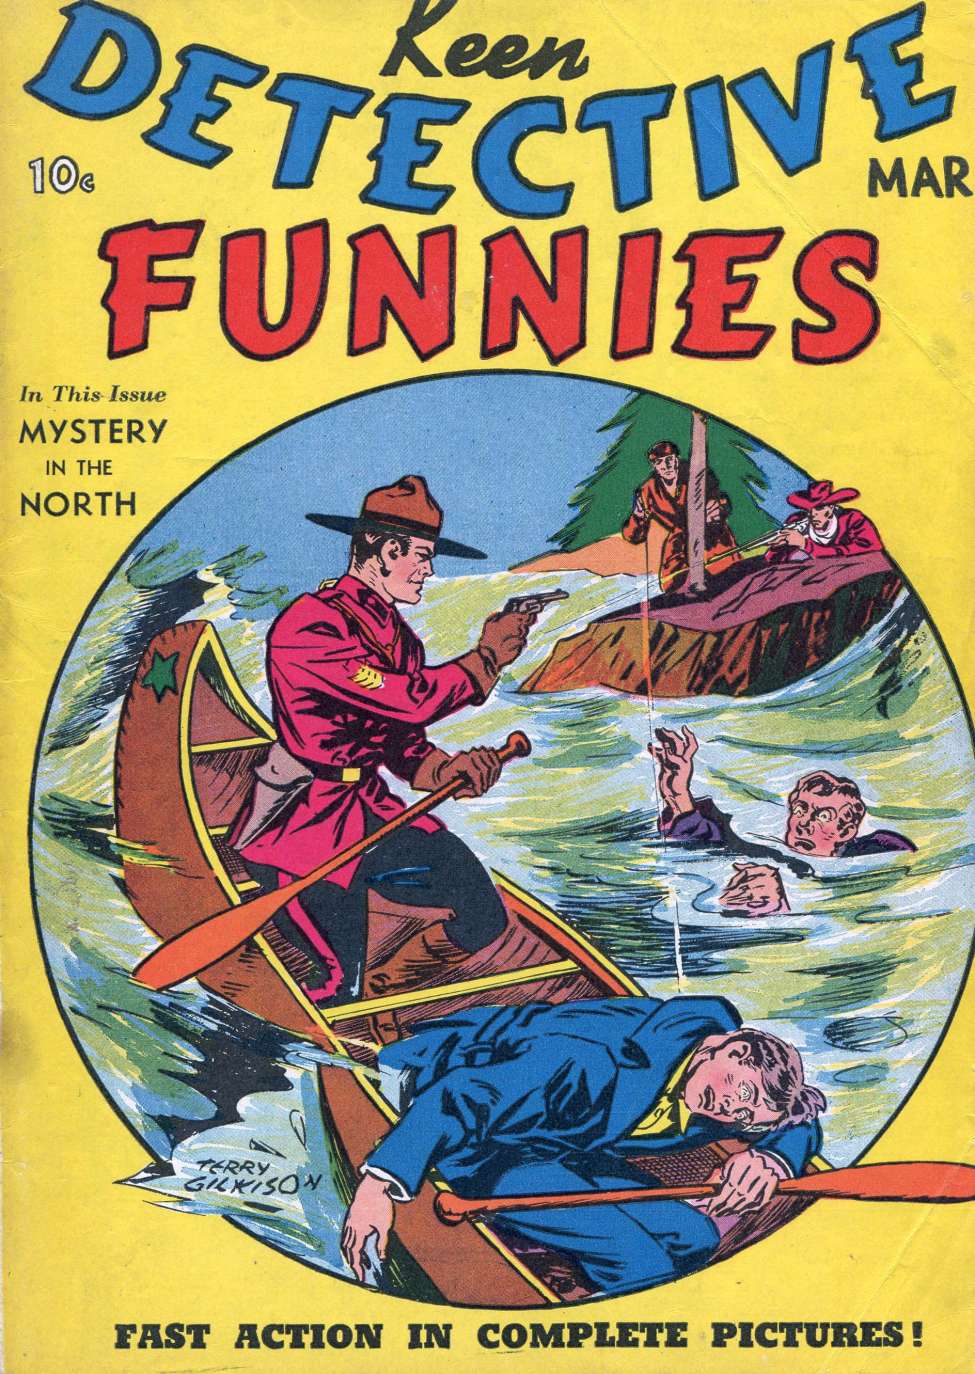 Book Cover For Keen Detective Funnies 7 v2 3